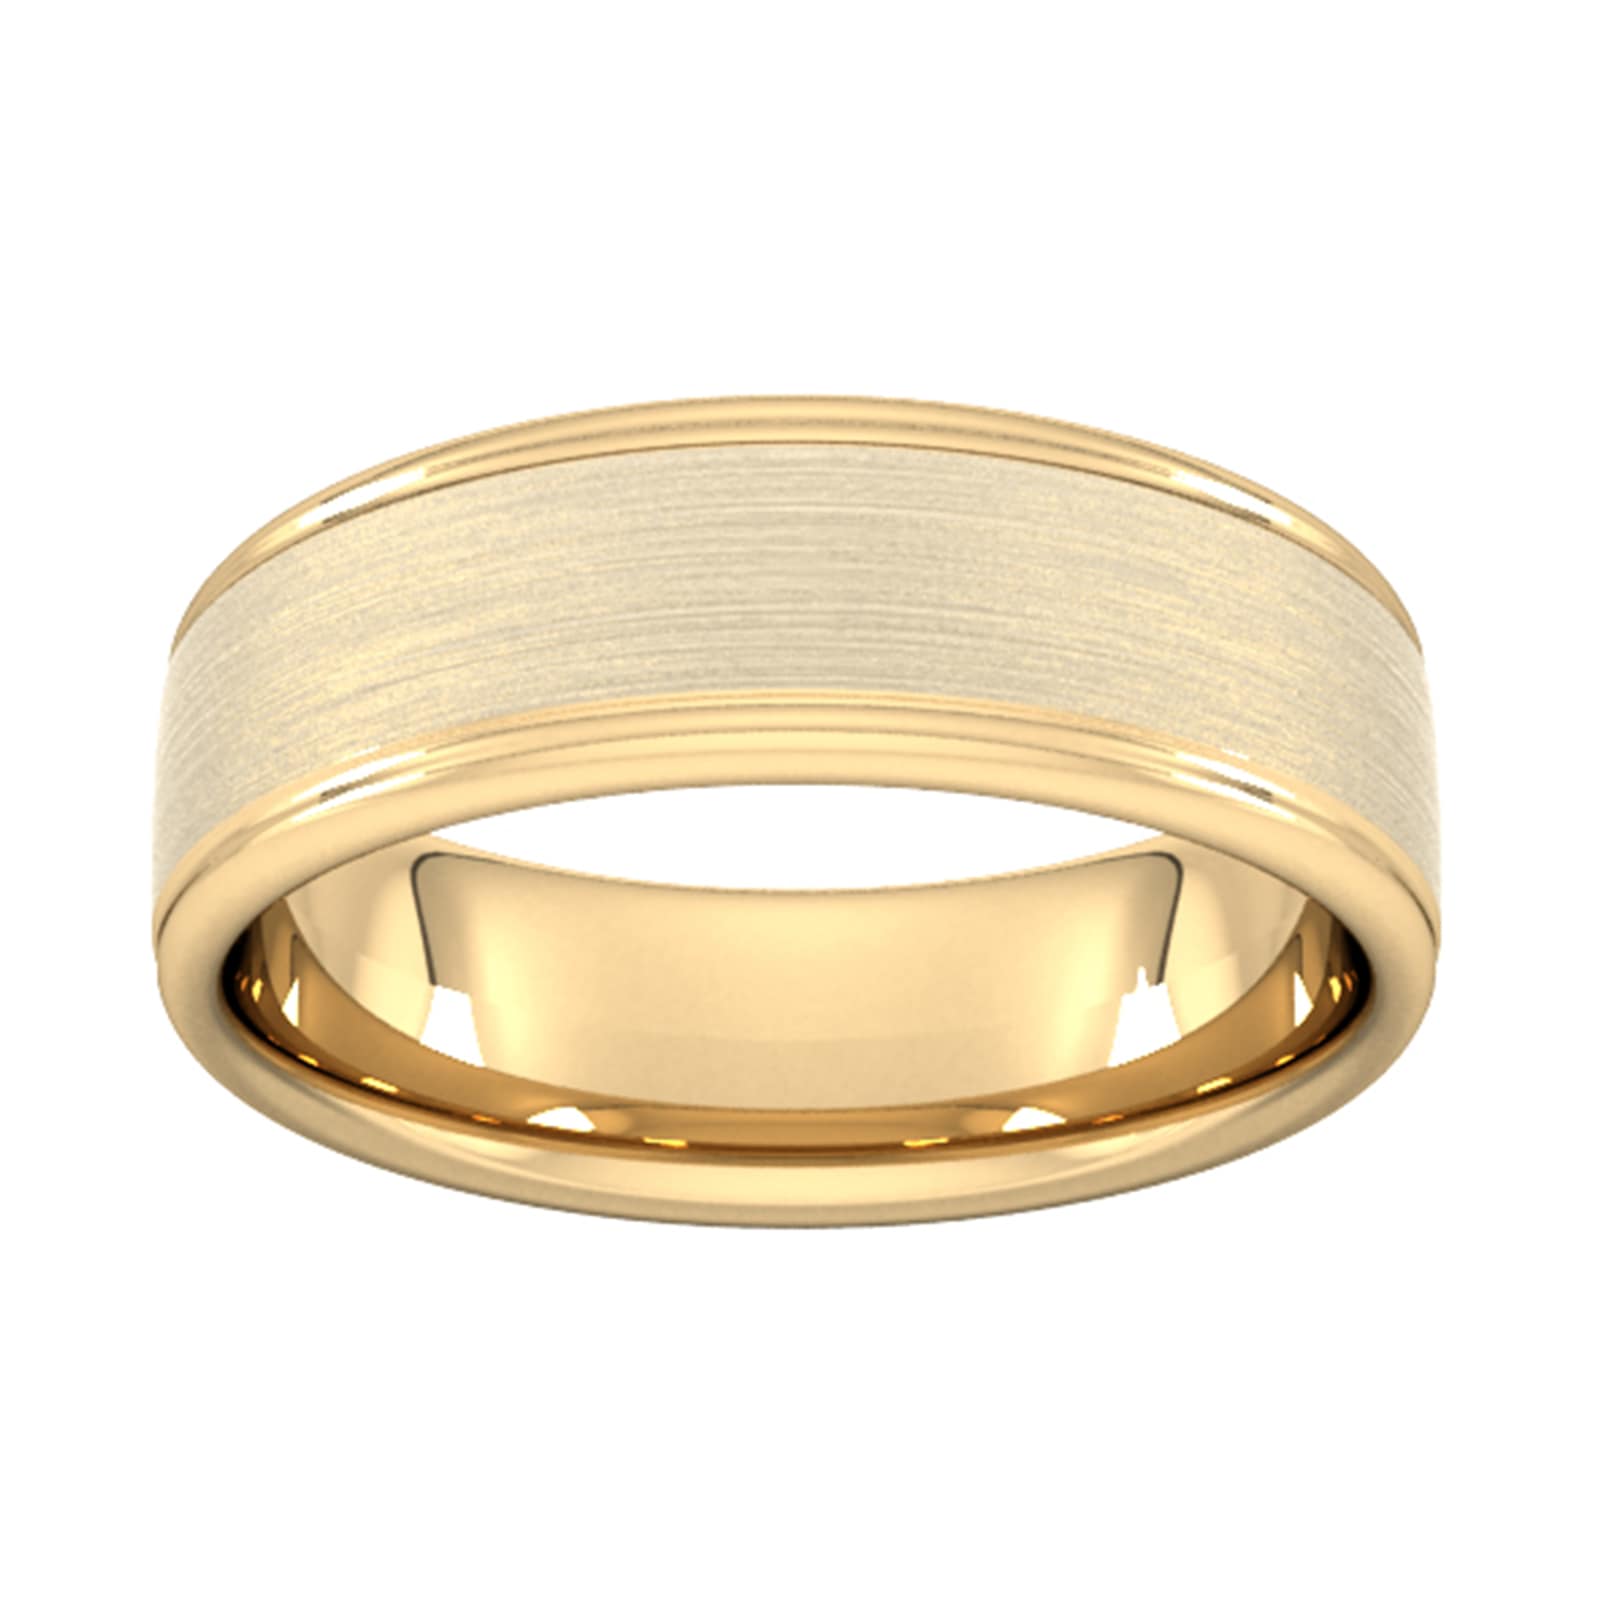 7mm Slight Court Heavy Matt Centre With Grooves Wedding Ring In 9 Carat Yellow Gold - Ring Size L